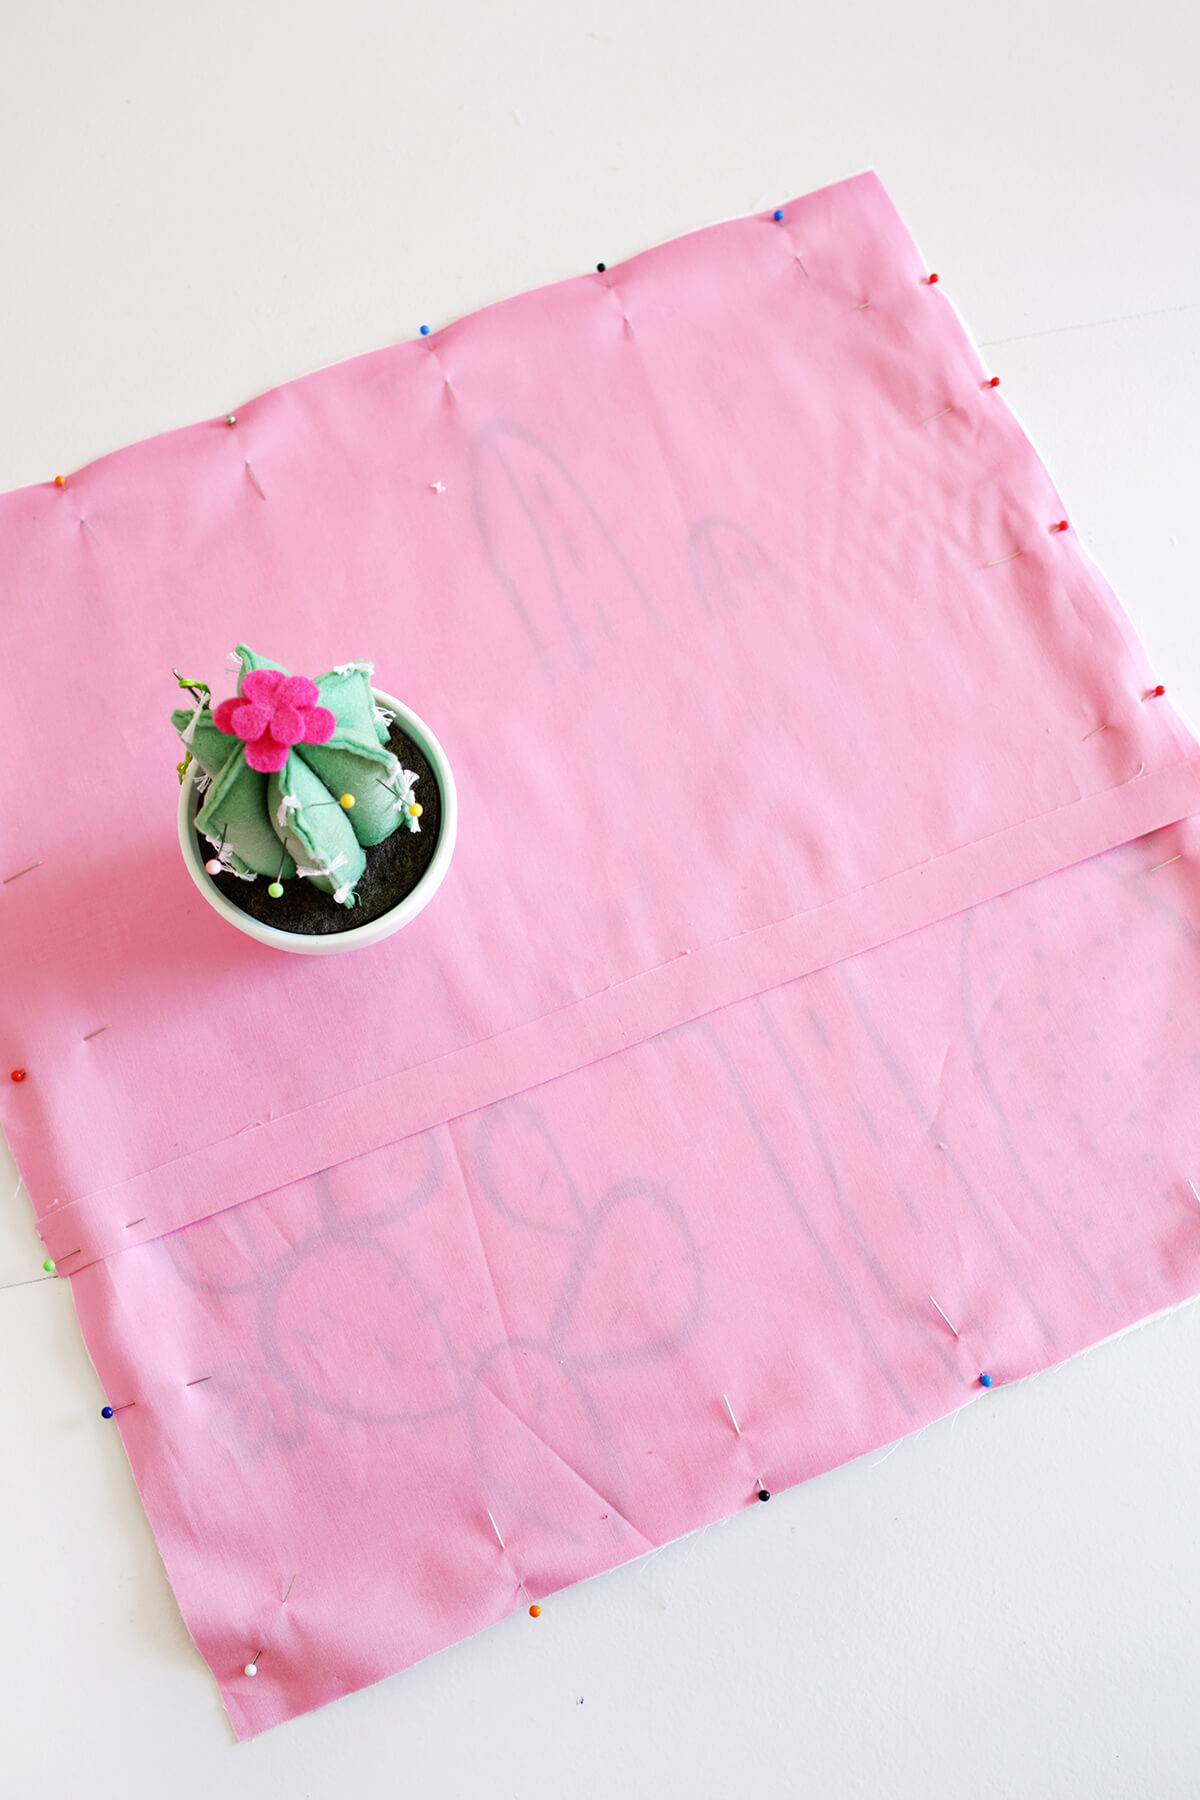 Cactus Outline Pillow DIY-template included! (click through for tutorial) 